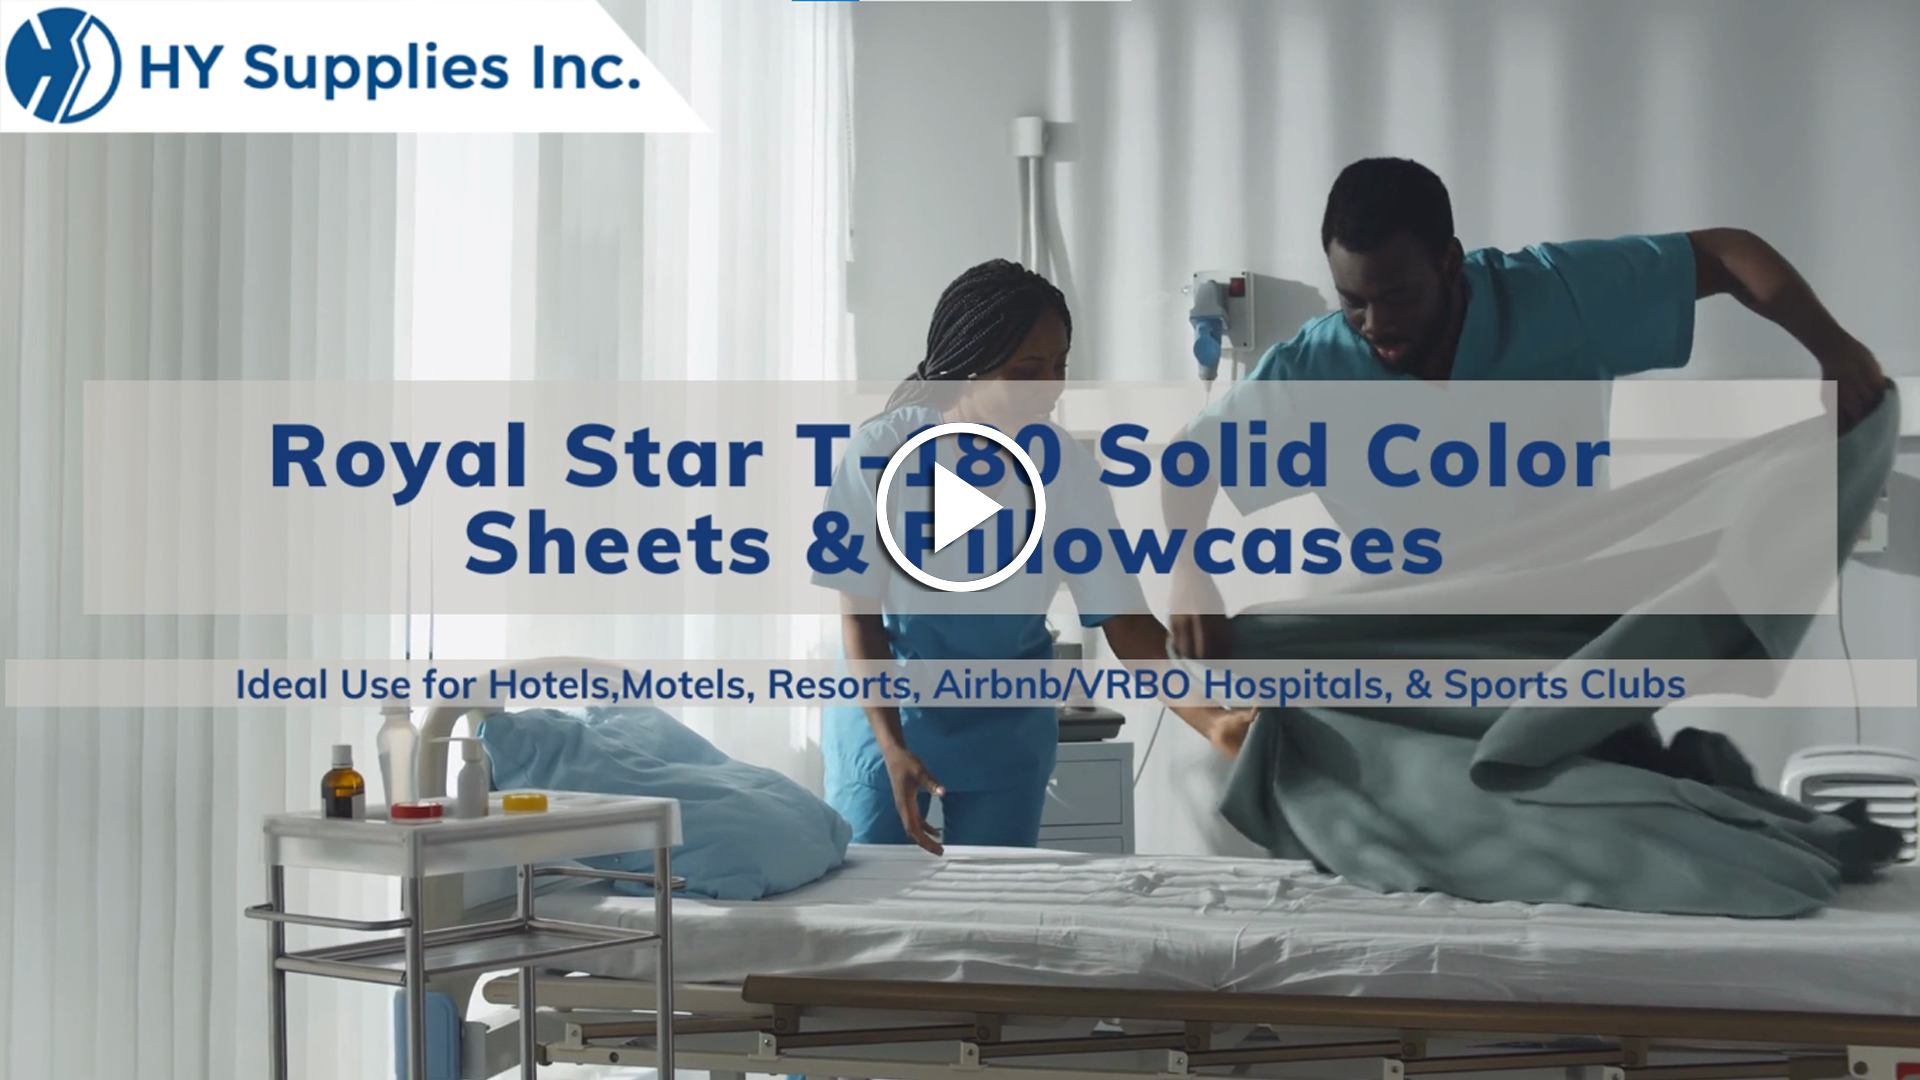 Royal Star T-180 Solid Color Sheets & Pillowcases